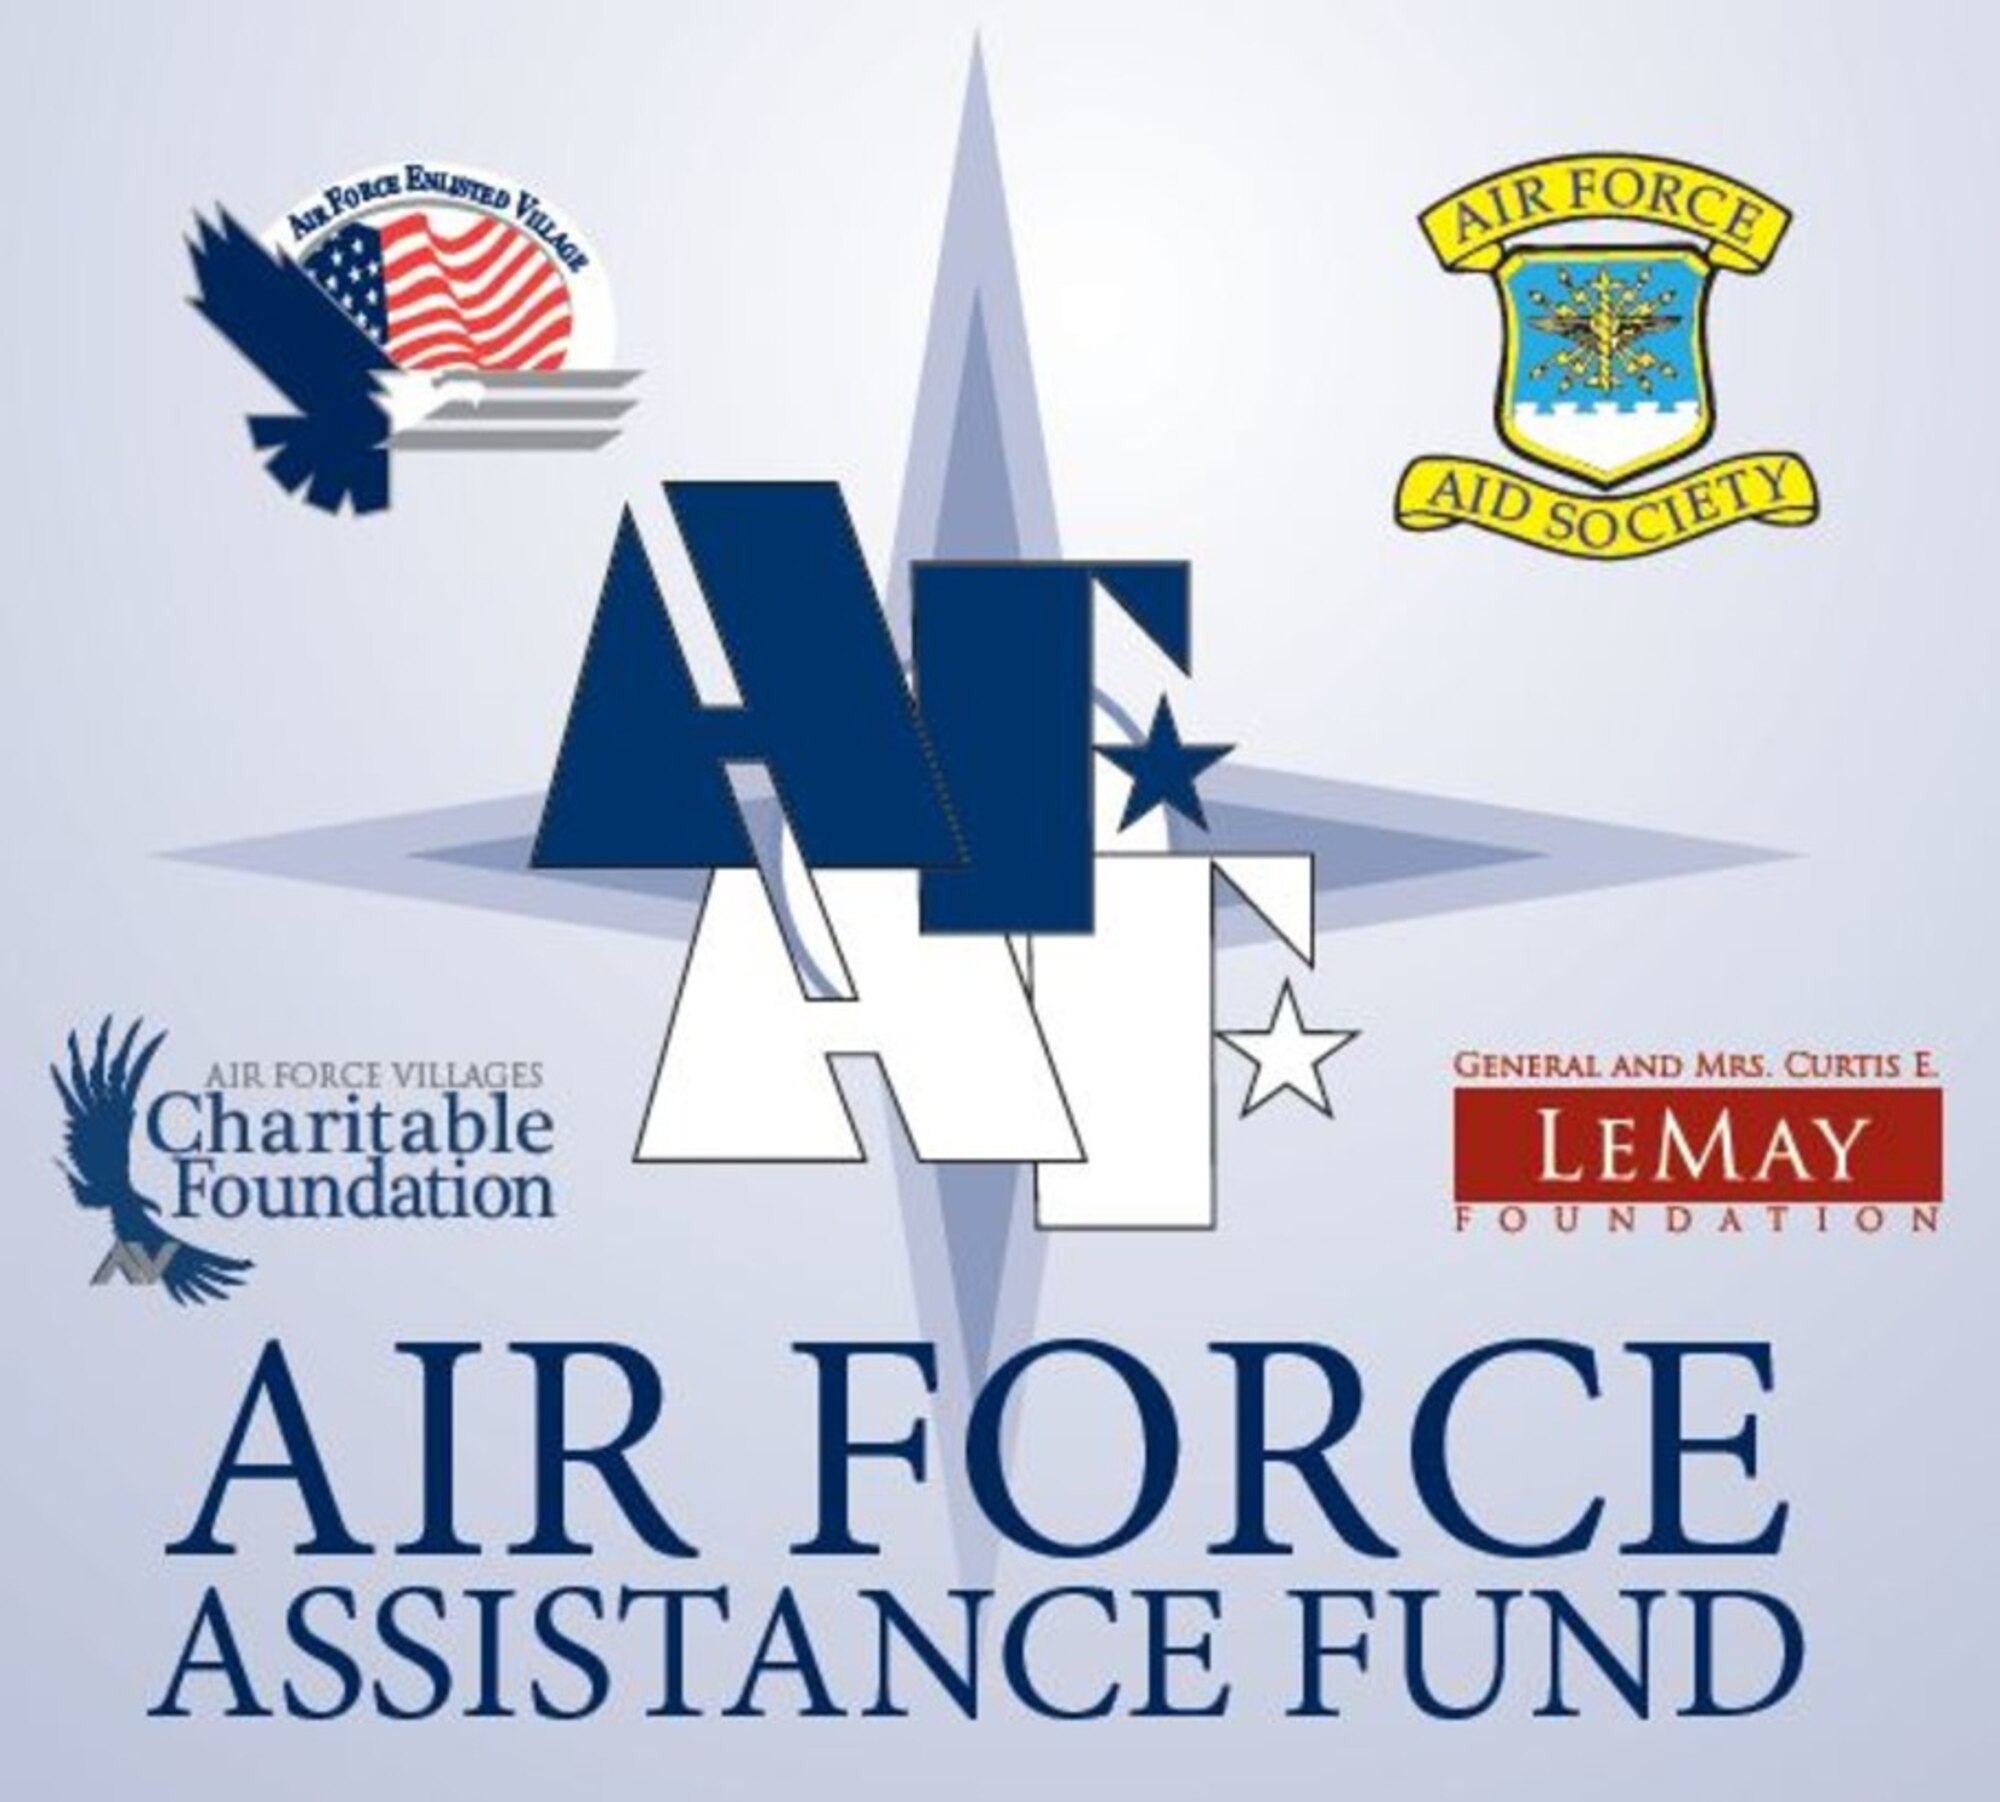 The 2020 Air Force Assistance Fund Campaign kicked off at Incirlik on March 9 and runs through April 17. The AFAF is an Air Force-wide initiative which supports charities that benefit all members of the Air Force family.